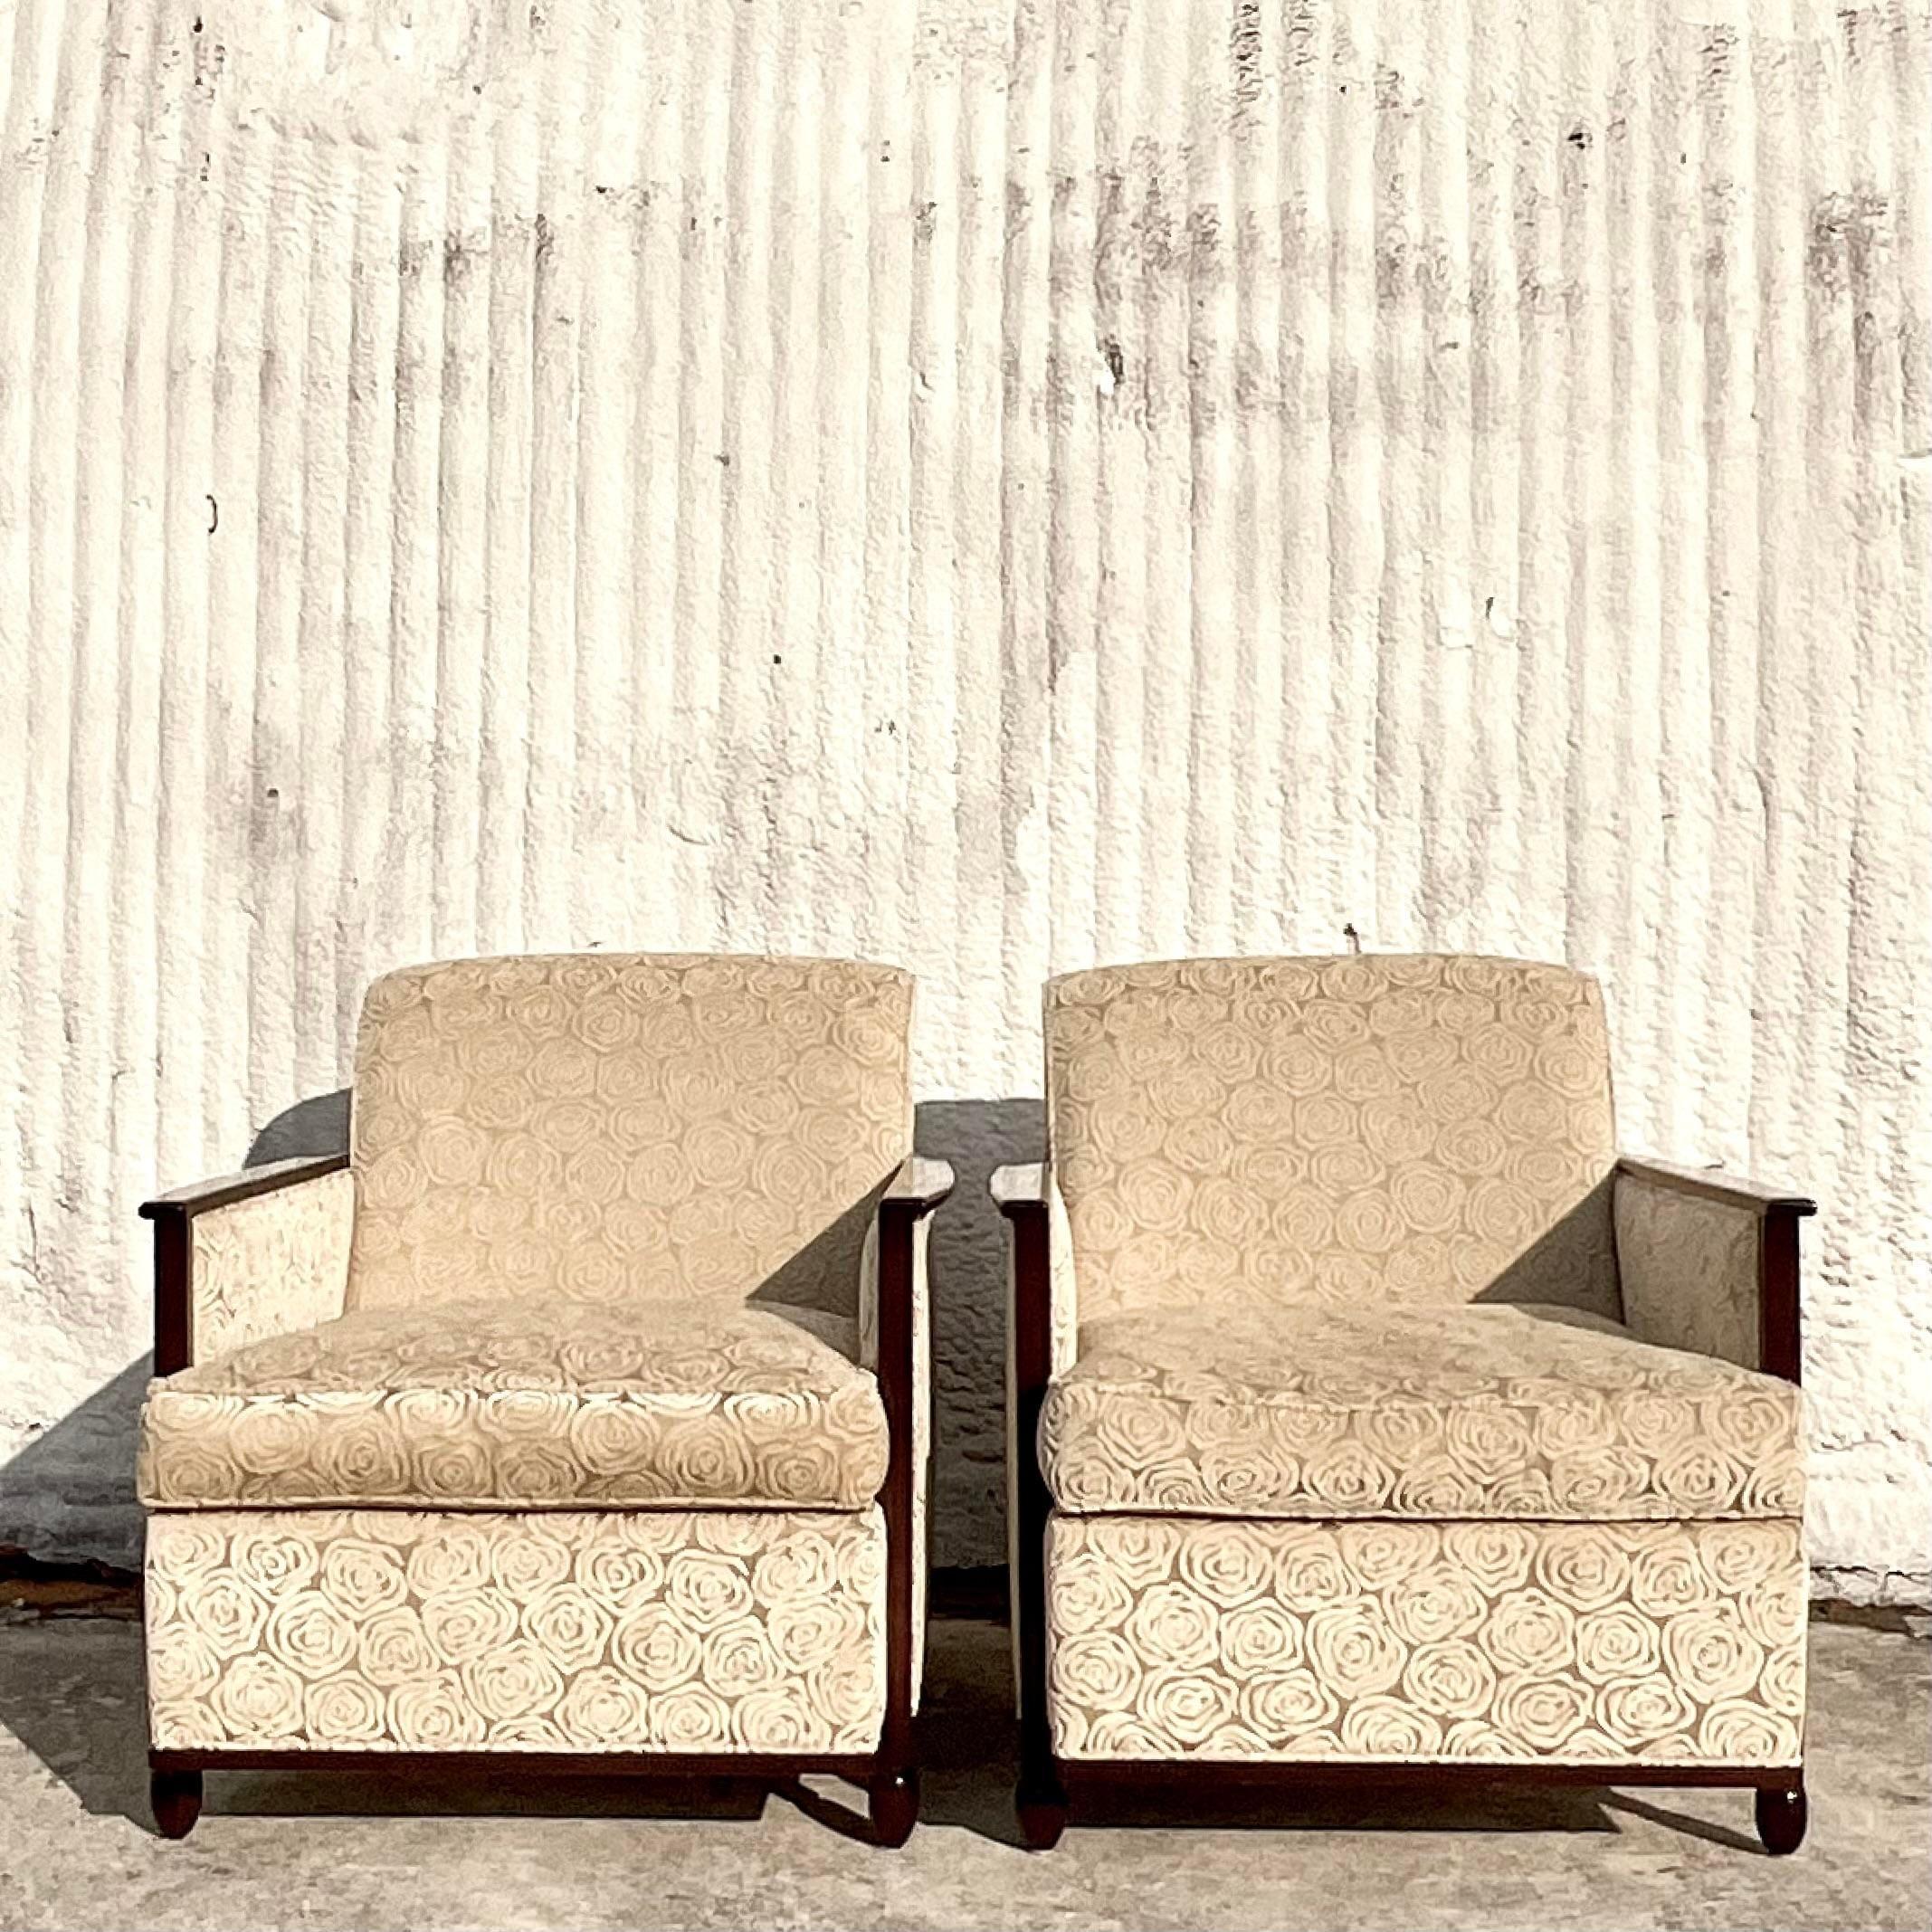 Contemporary Vintage Custom Geoffrey Bradfield Deco Lounge Chairs - a Pair For Sale